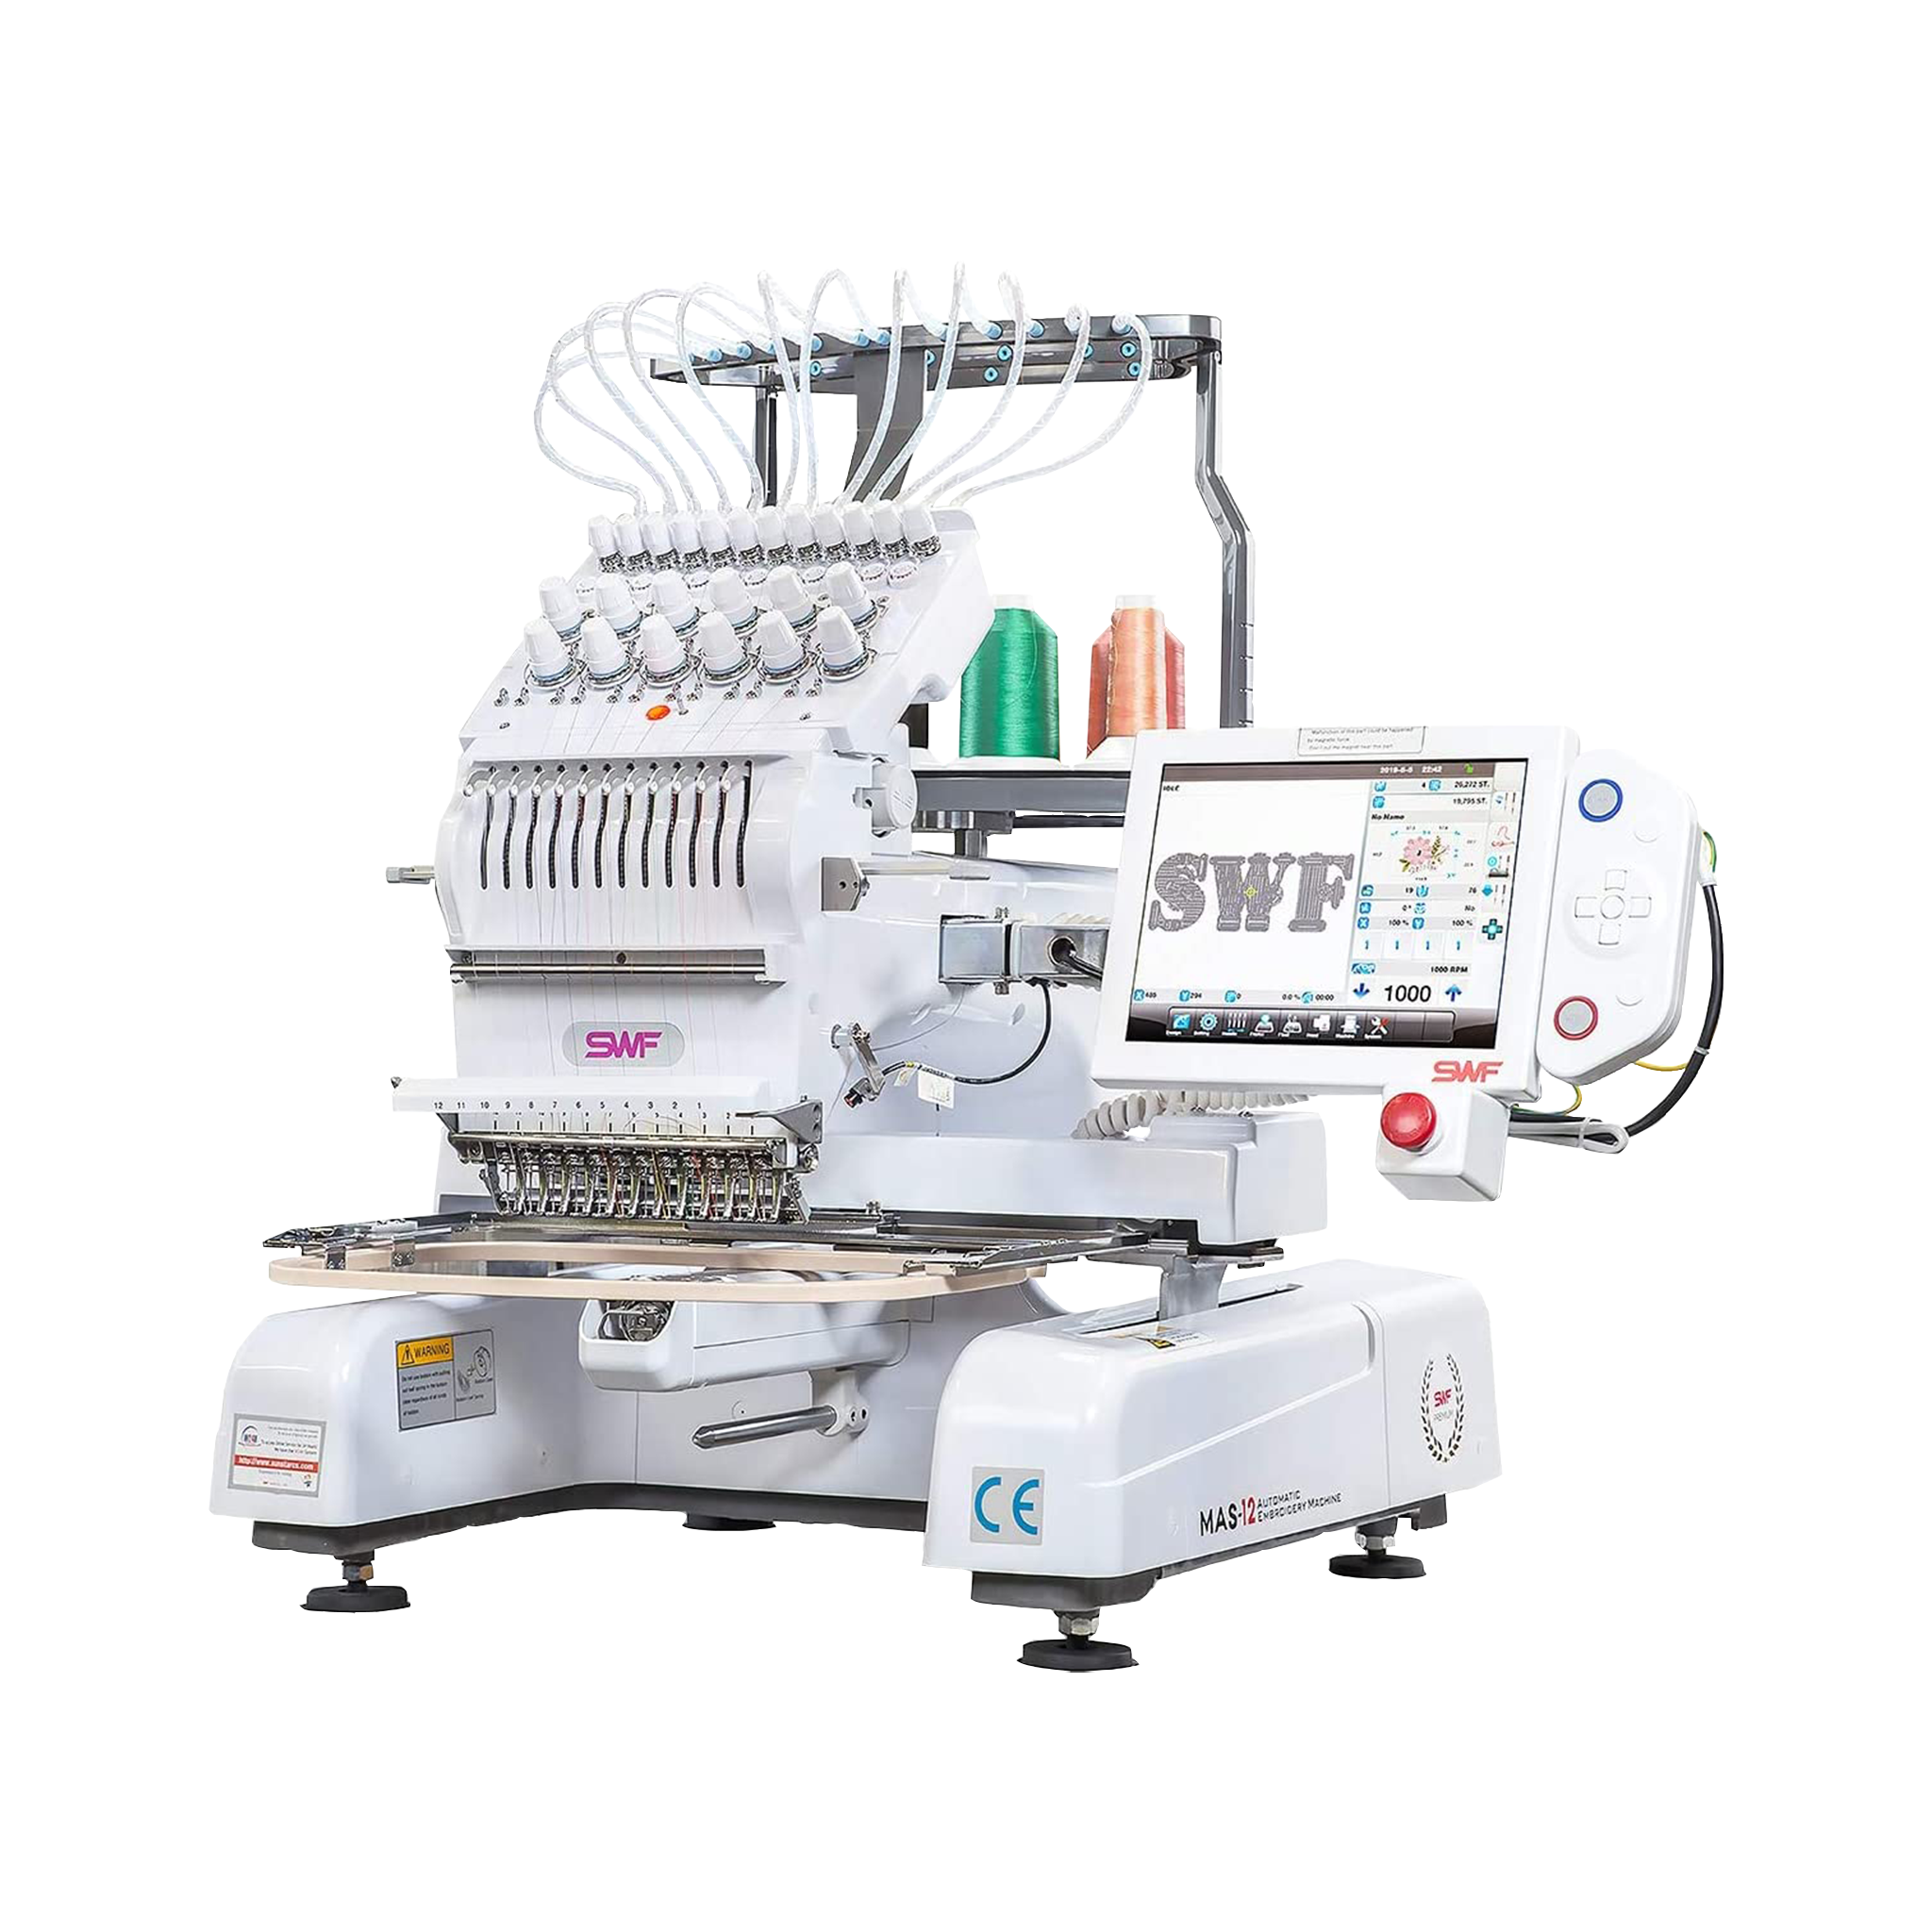 Fixing an error 206 on a SWF Embroidery Machine